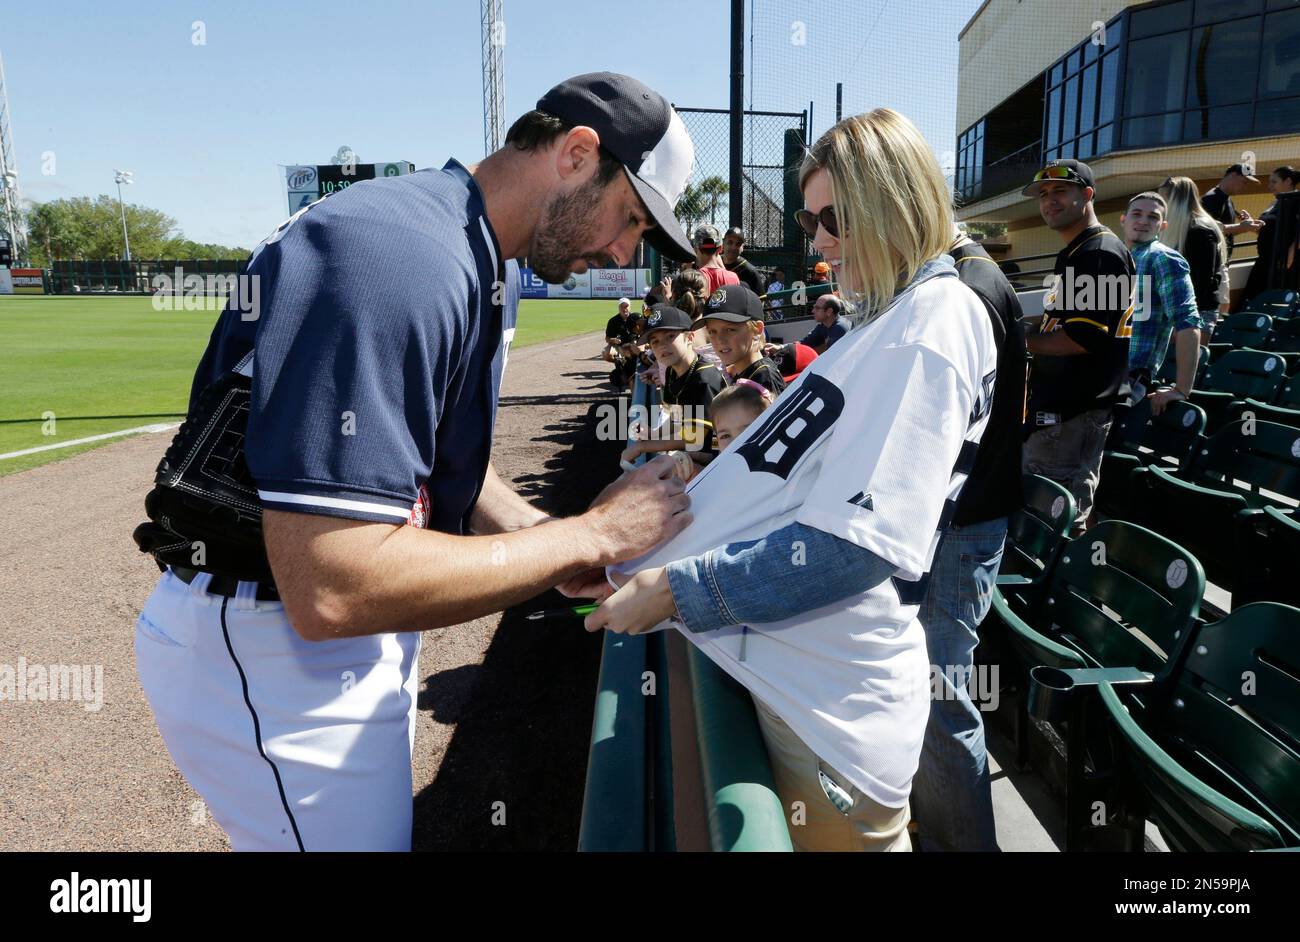 Detroit Tigers pitcher Justin Verlander signs the jersey of B Lipinski,  of Grand Rapid, Mich., before a spring training baseball game against the  New York Mets in Lakeland, Fla., Saturday, March 8